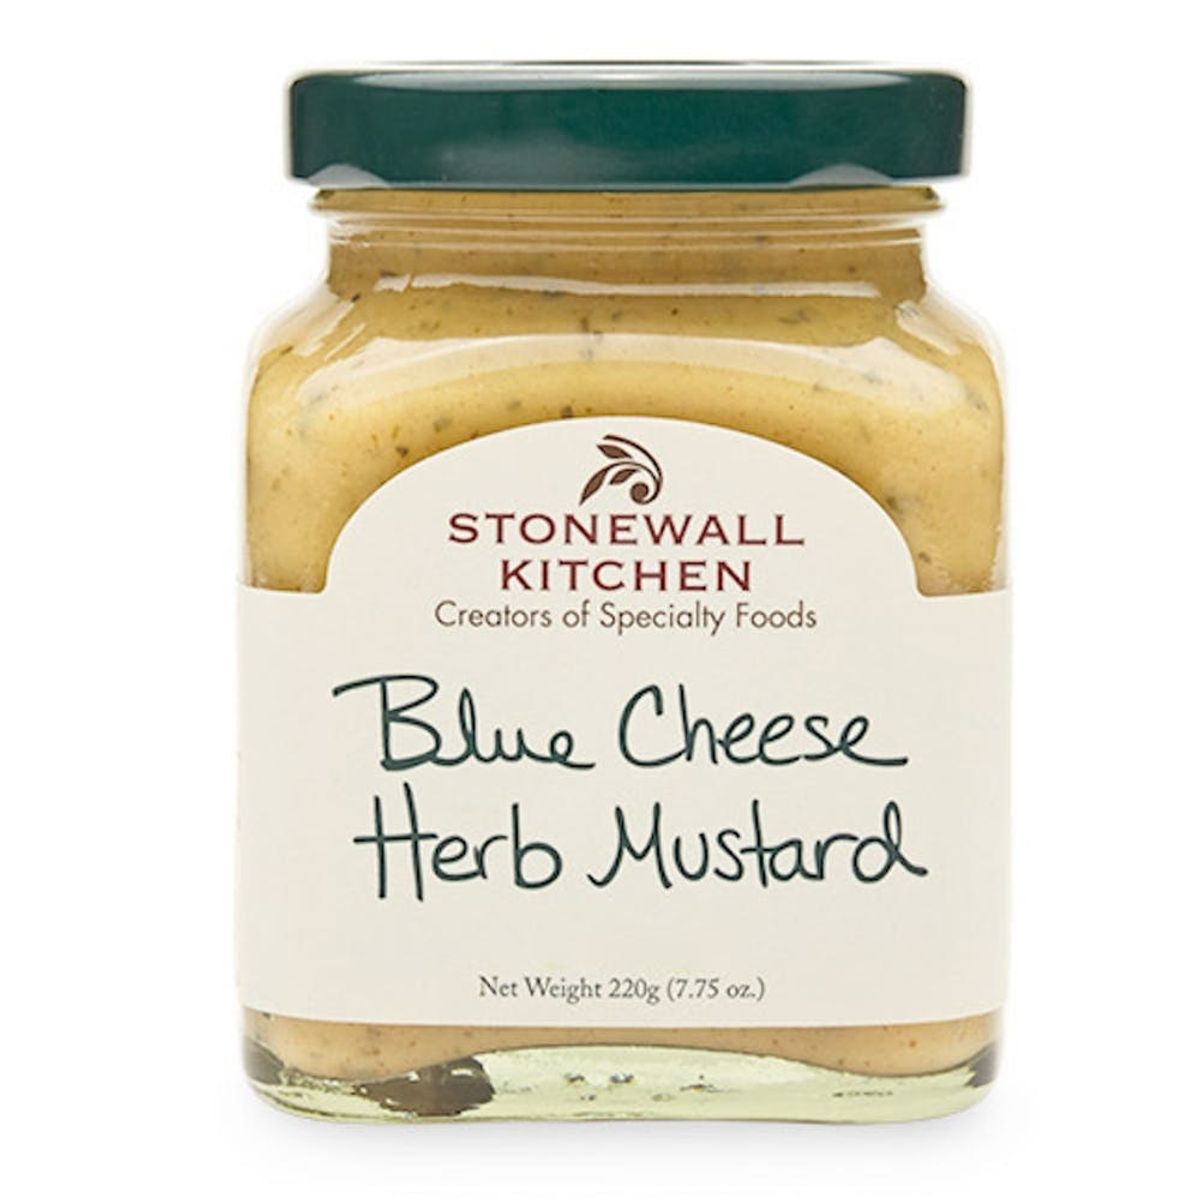 7 Awesome Mustard Flavors You Didn’t Know Existed